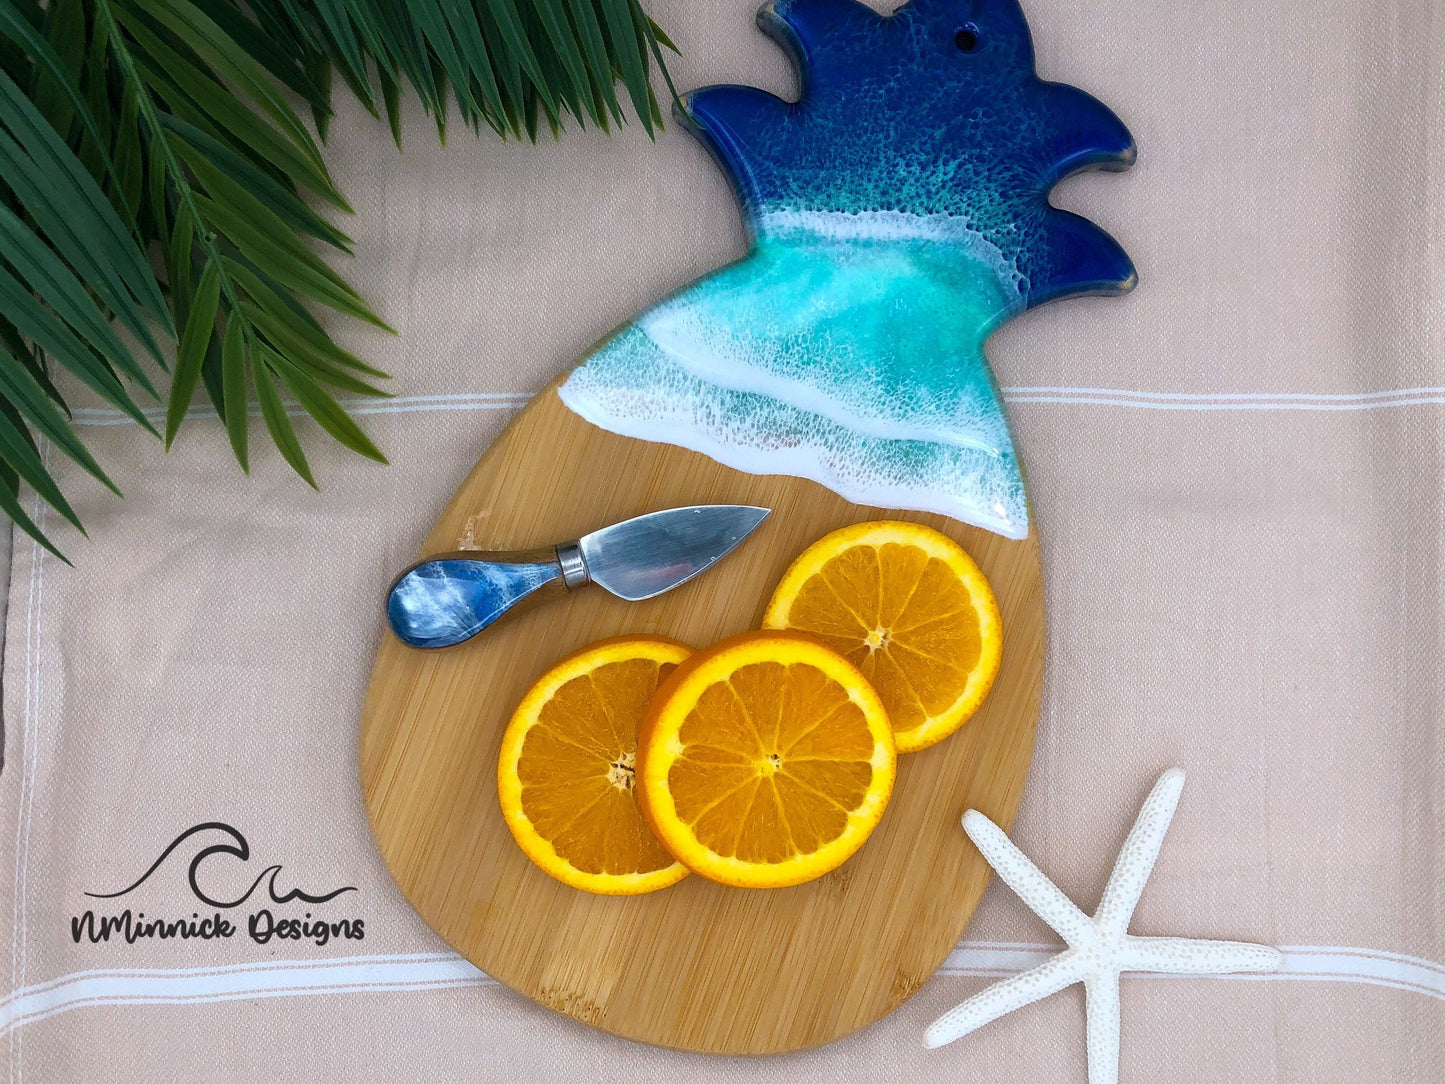 Pineapple-shaped bamboo serving board covered in navy blue and chartreuse ocean resin art to resemble the waves of the ocean.  Laying on a tan beach towel next to a natural starfish.  Orange slices and a matching cheese knife displayed on top.  Cheese knife sold separately. 